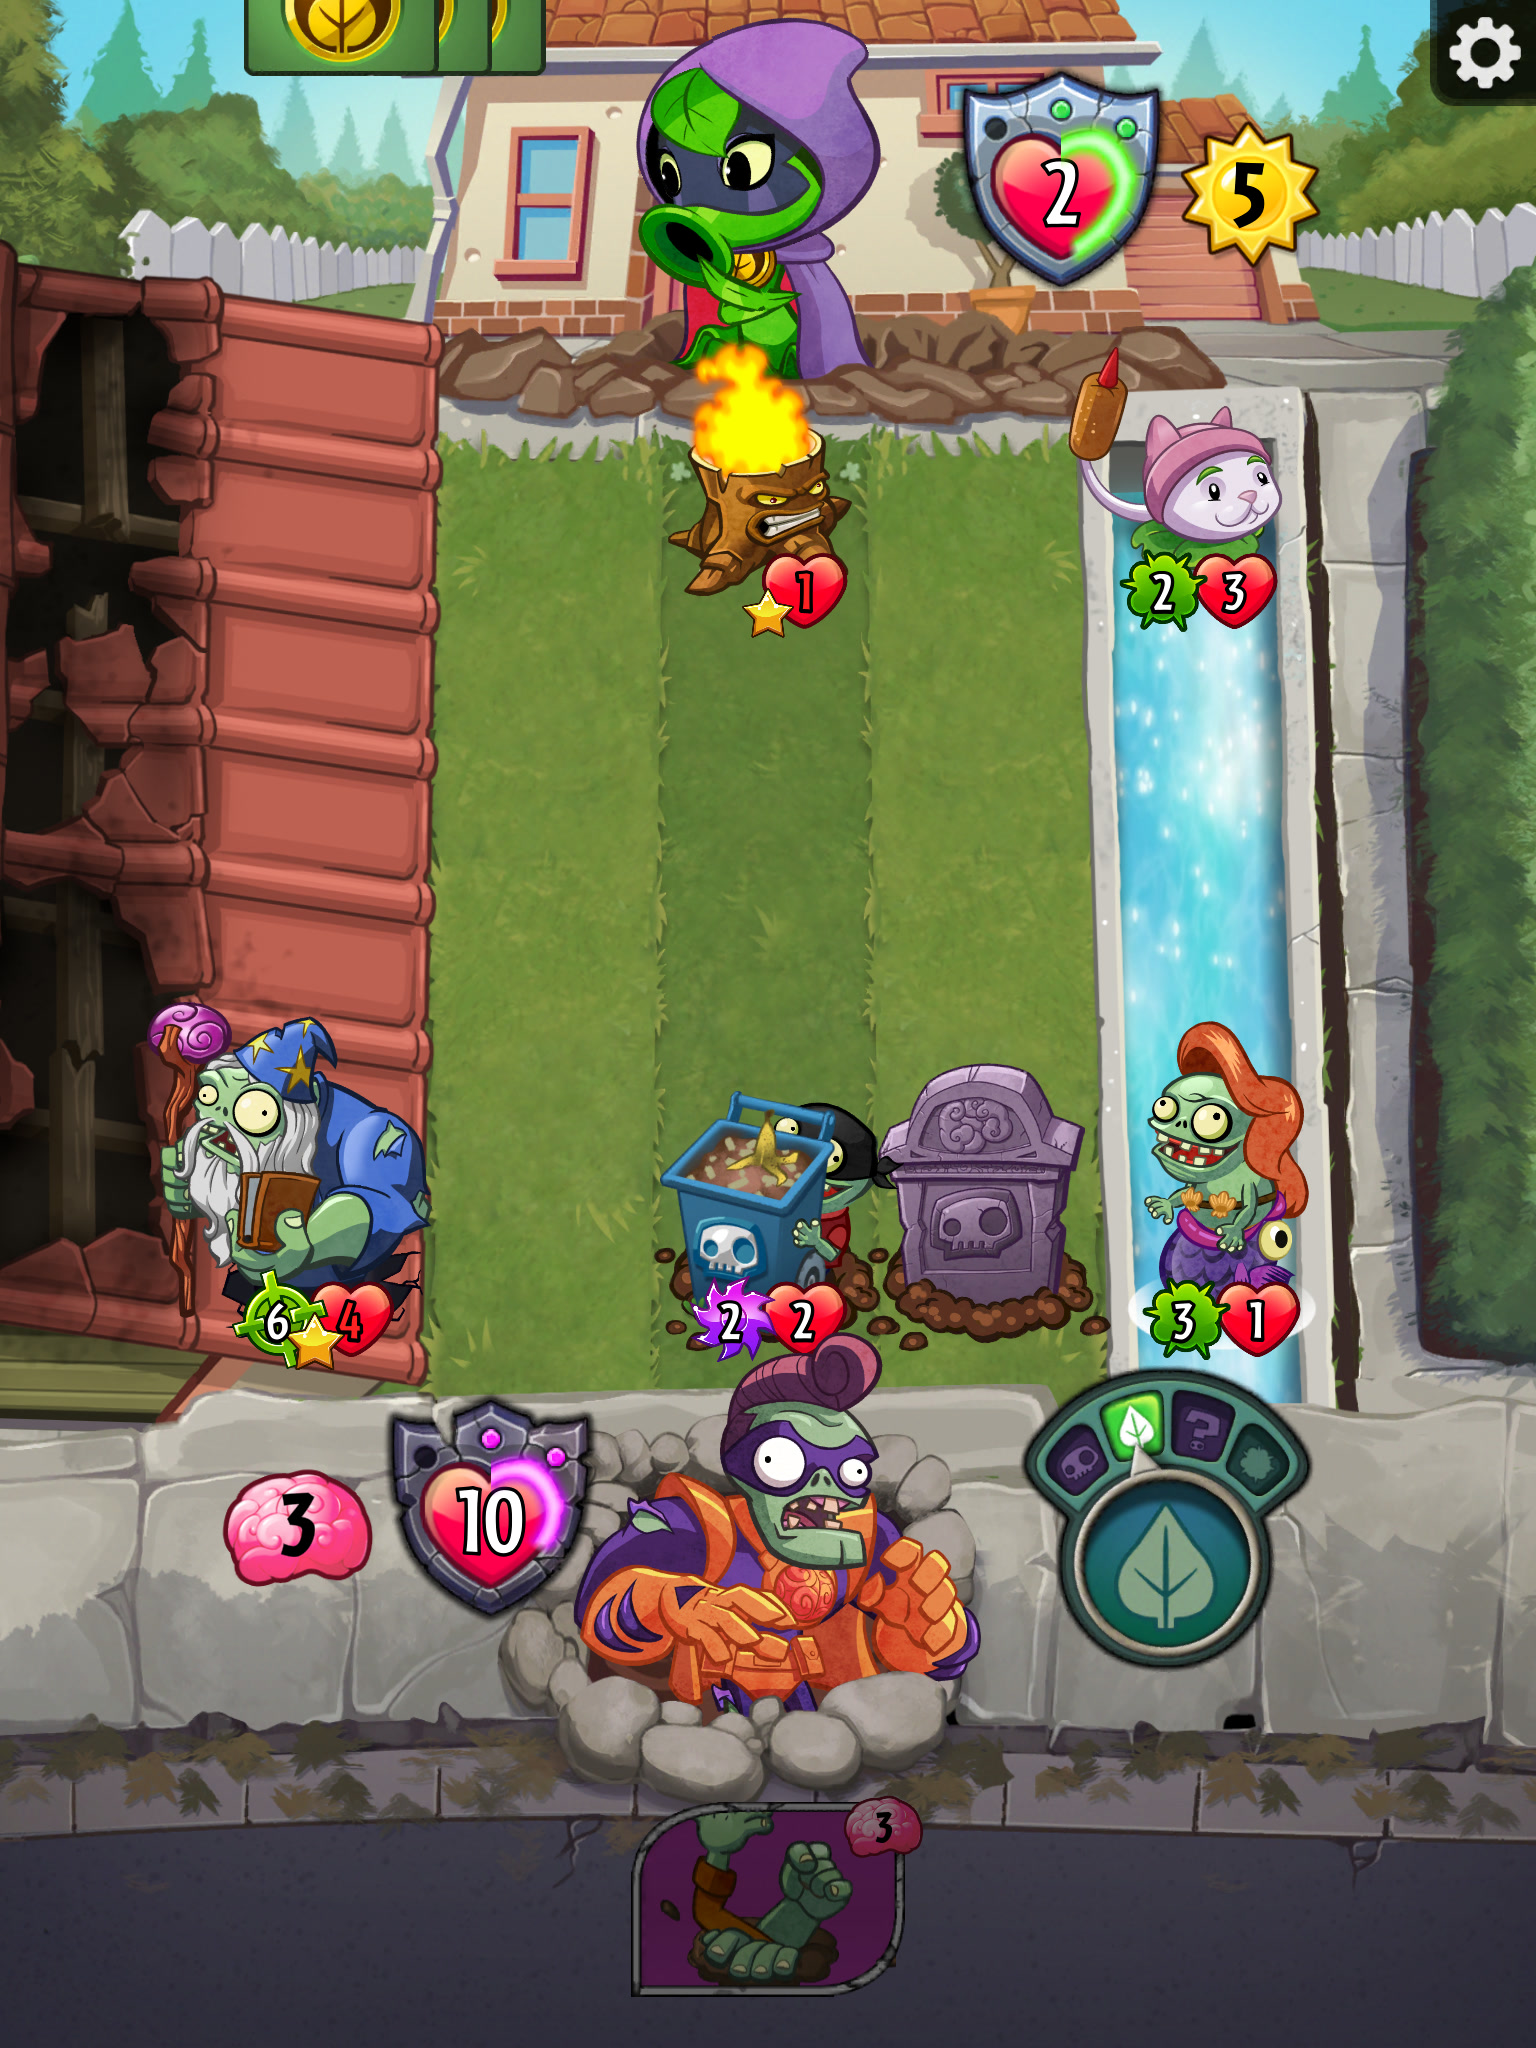 plants vs zombies heroes puzzle party